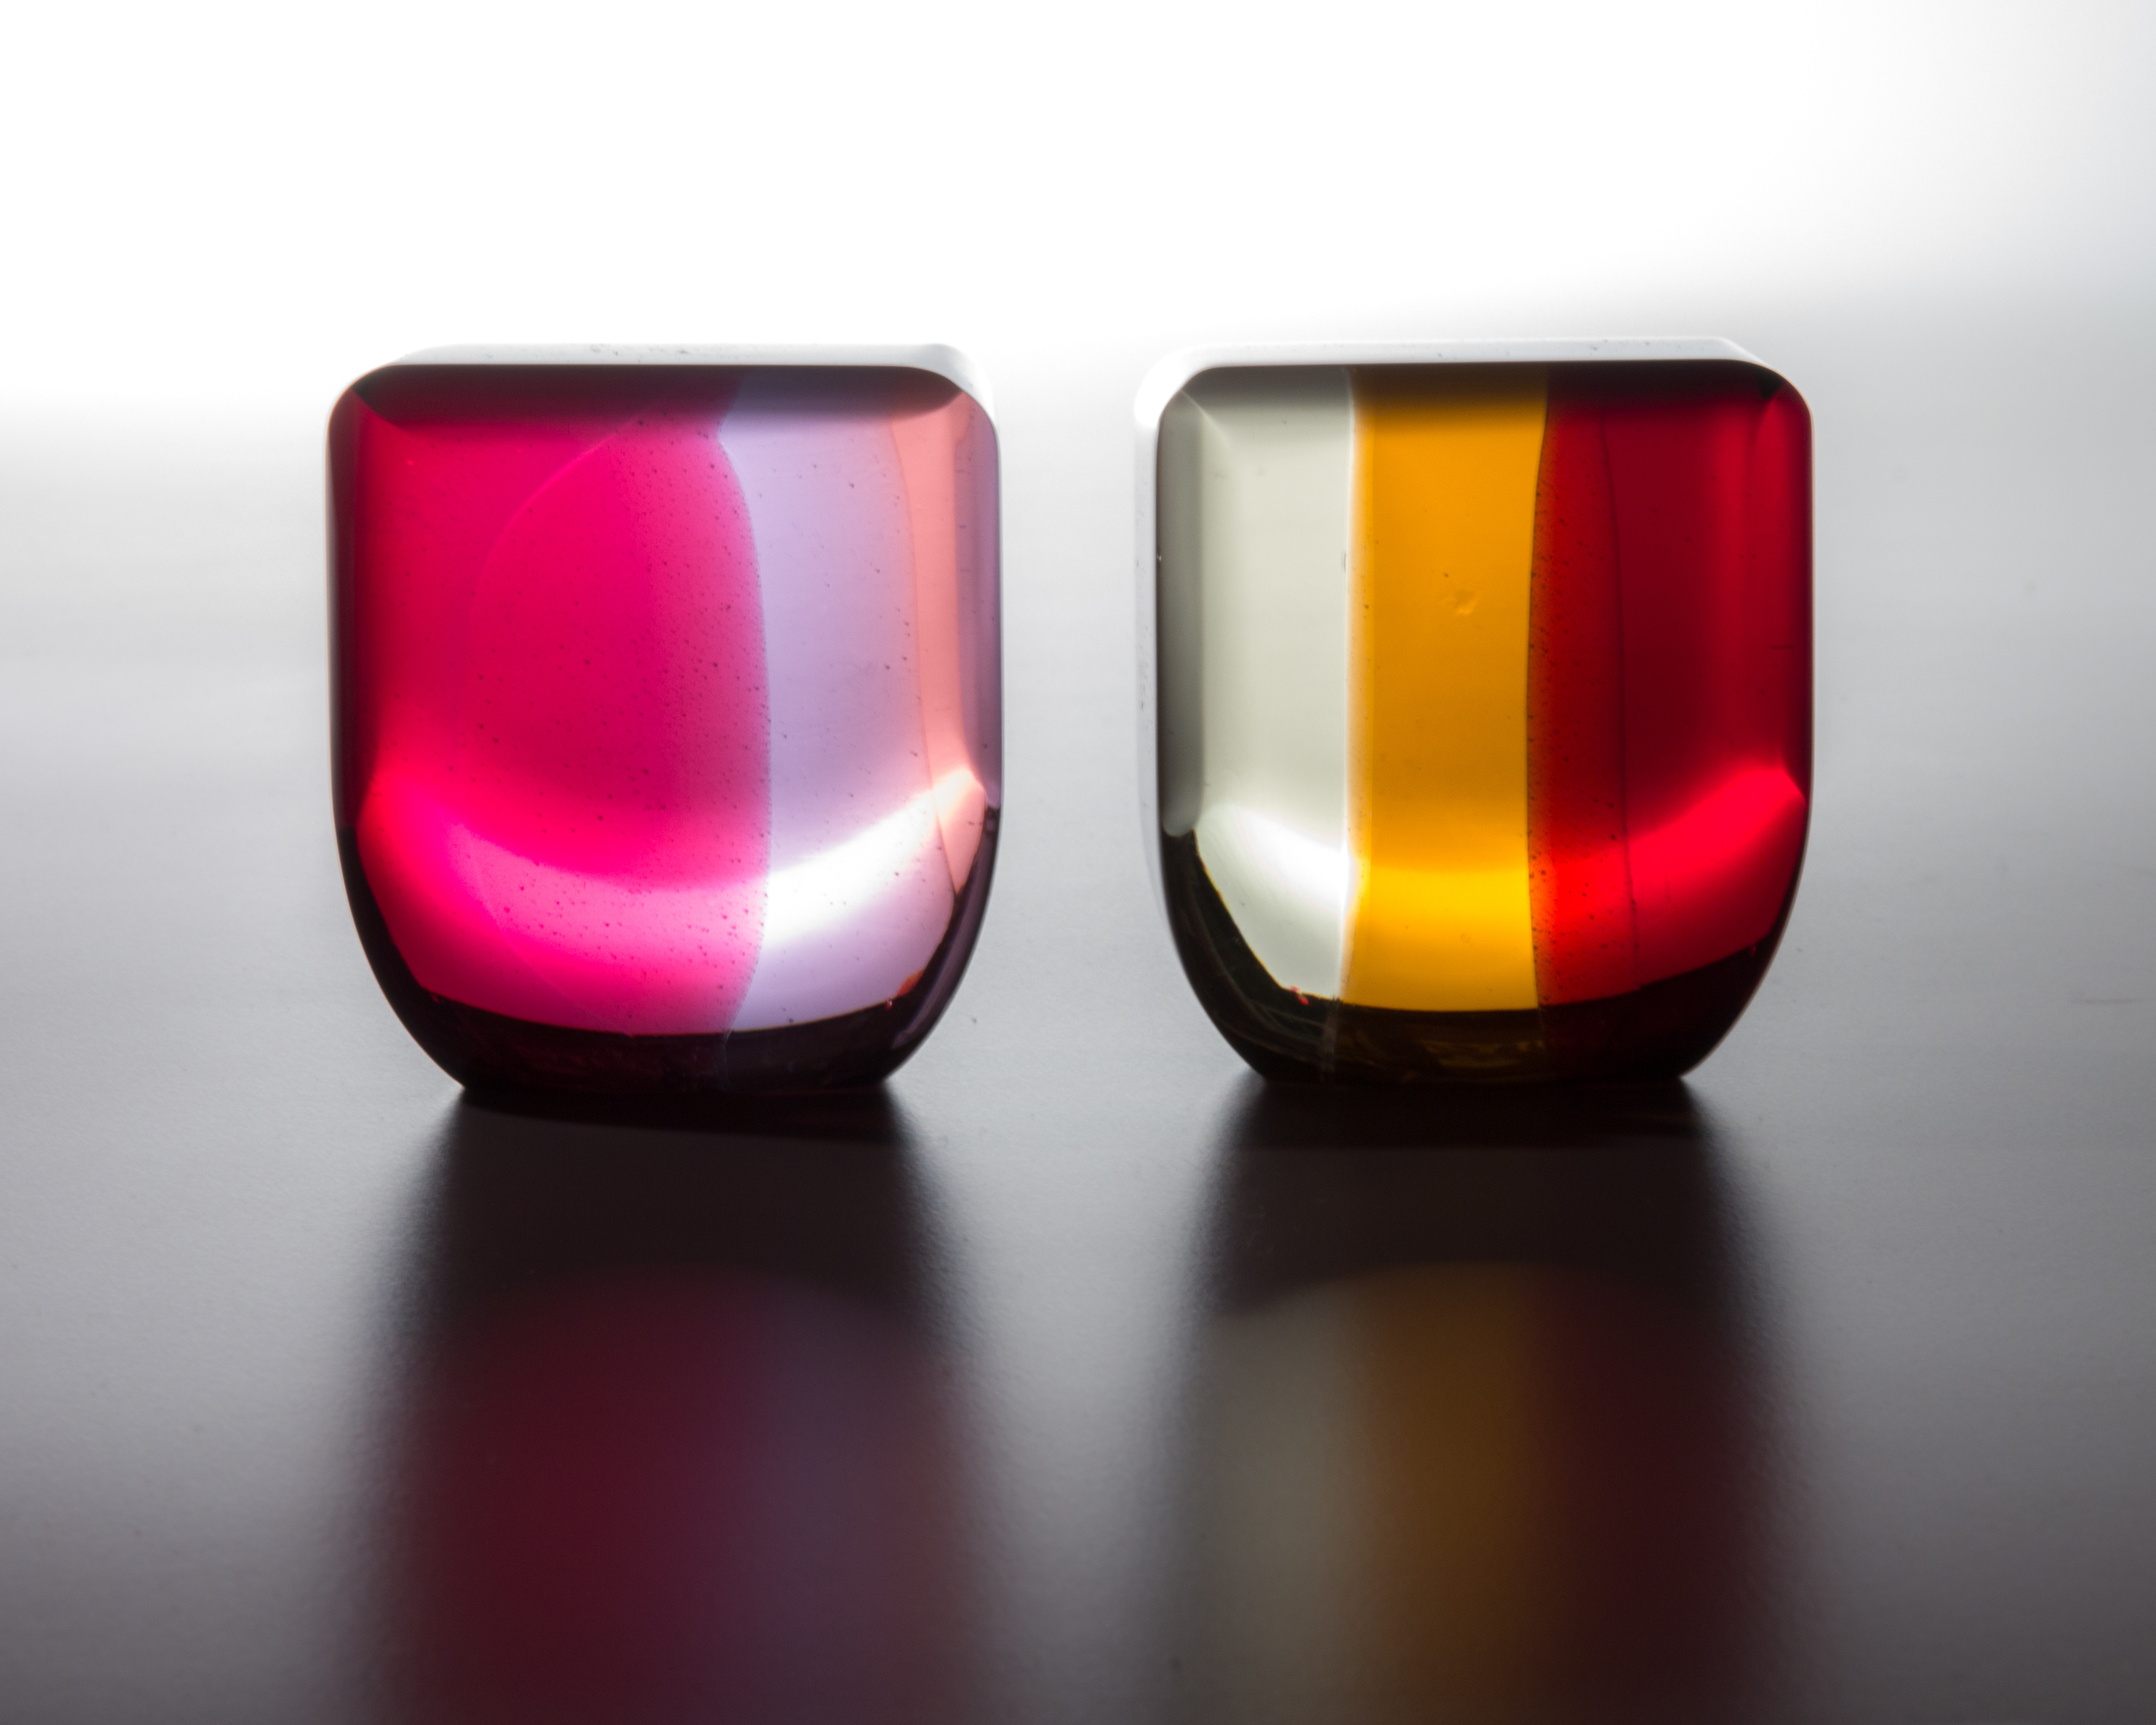   Polychromasia&nbsp;6+7 , cast, cut and polished glass, 2013 